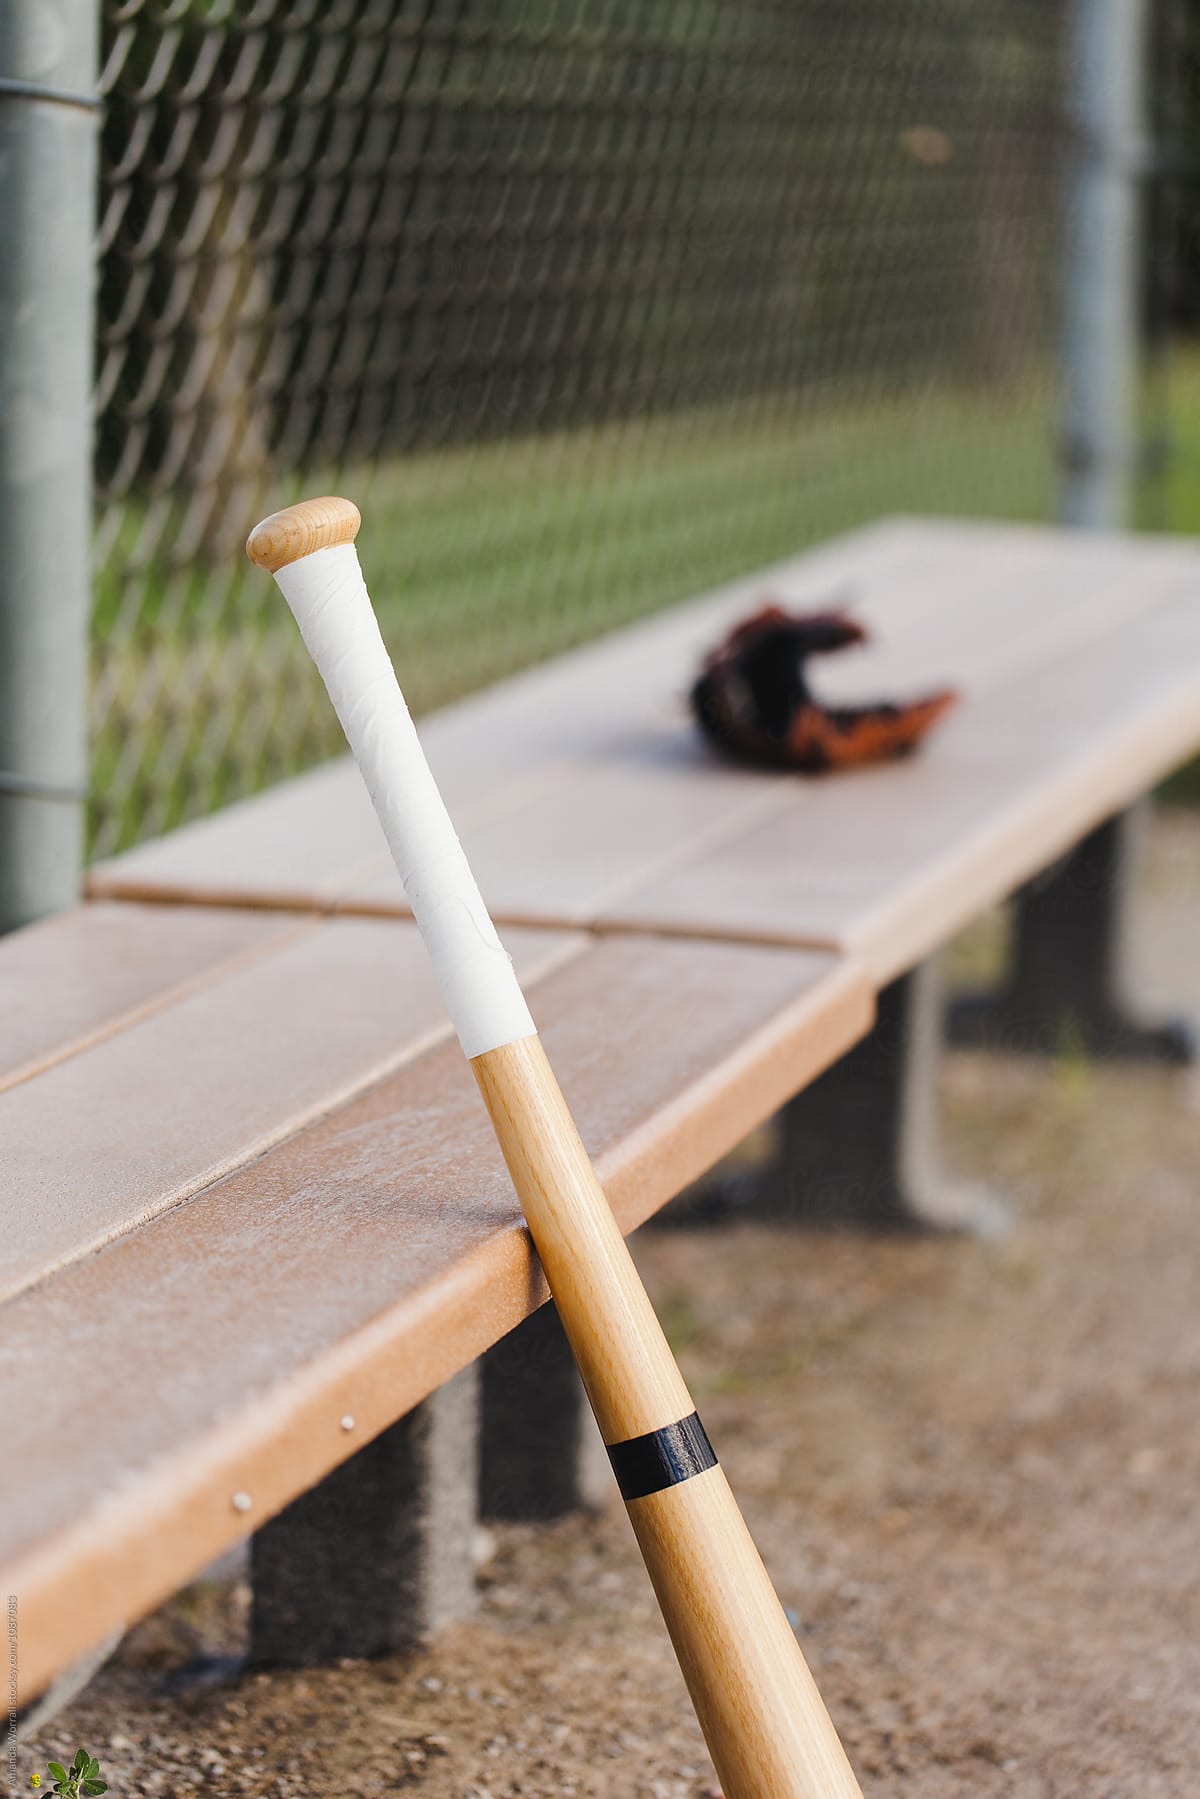 Baseball bat leaning against the dugout bench